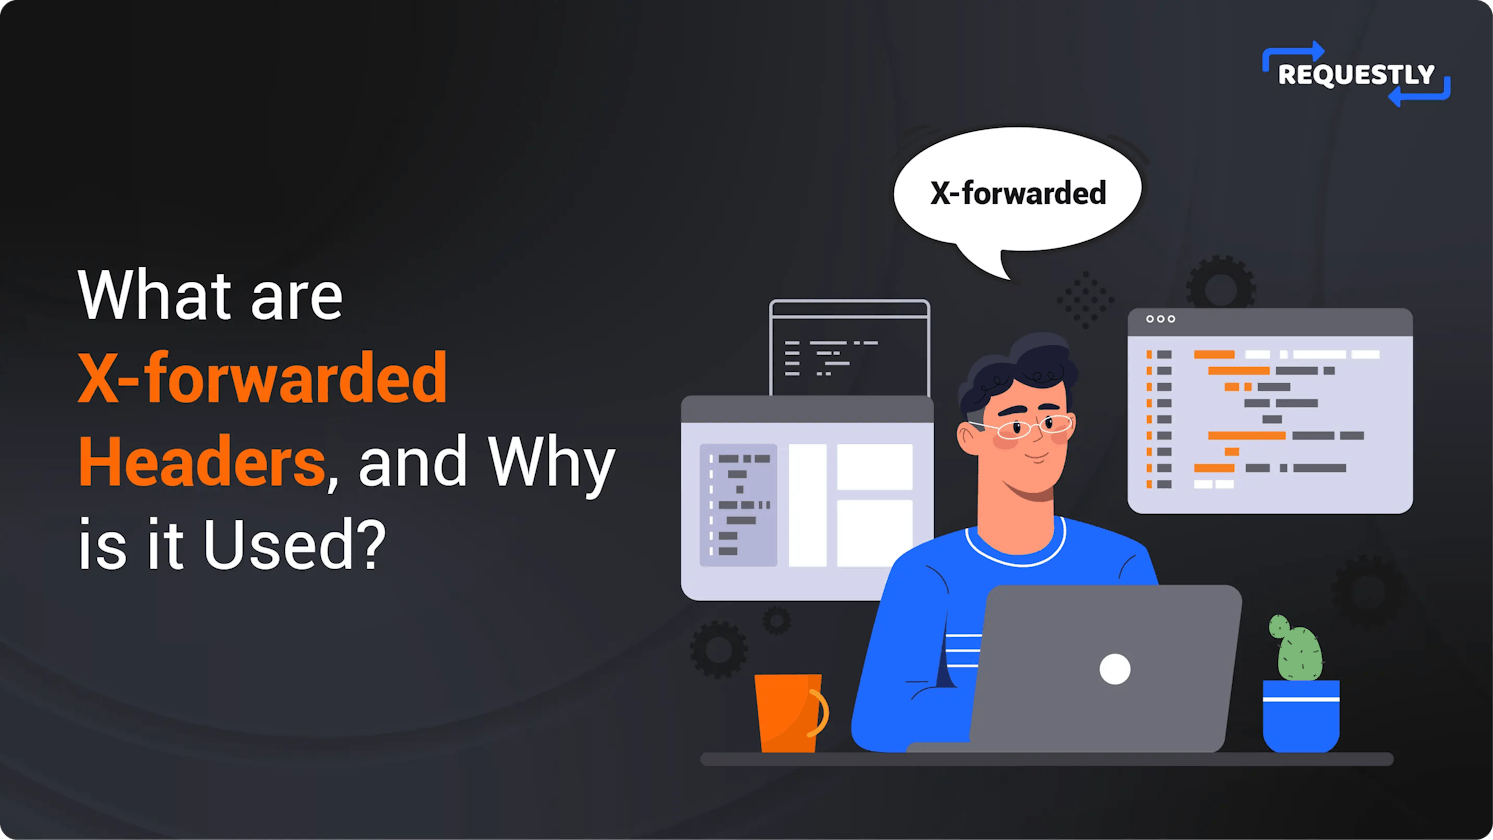 What are X-forwarded Headers, and why it is used?